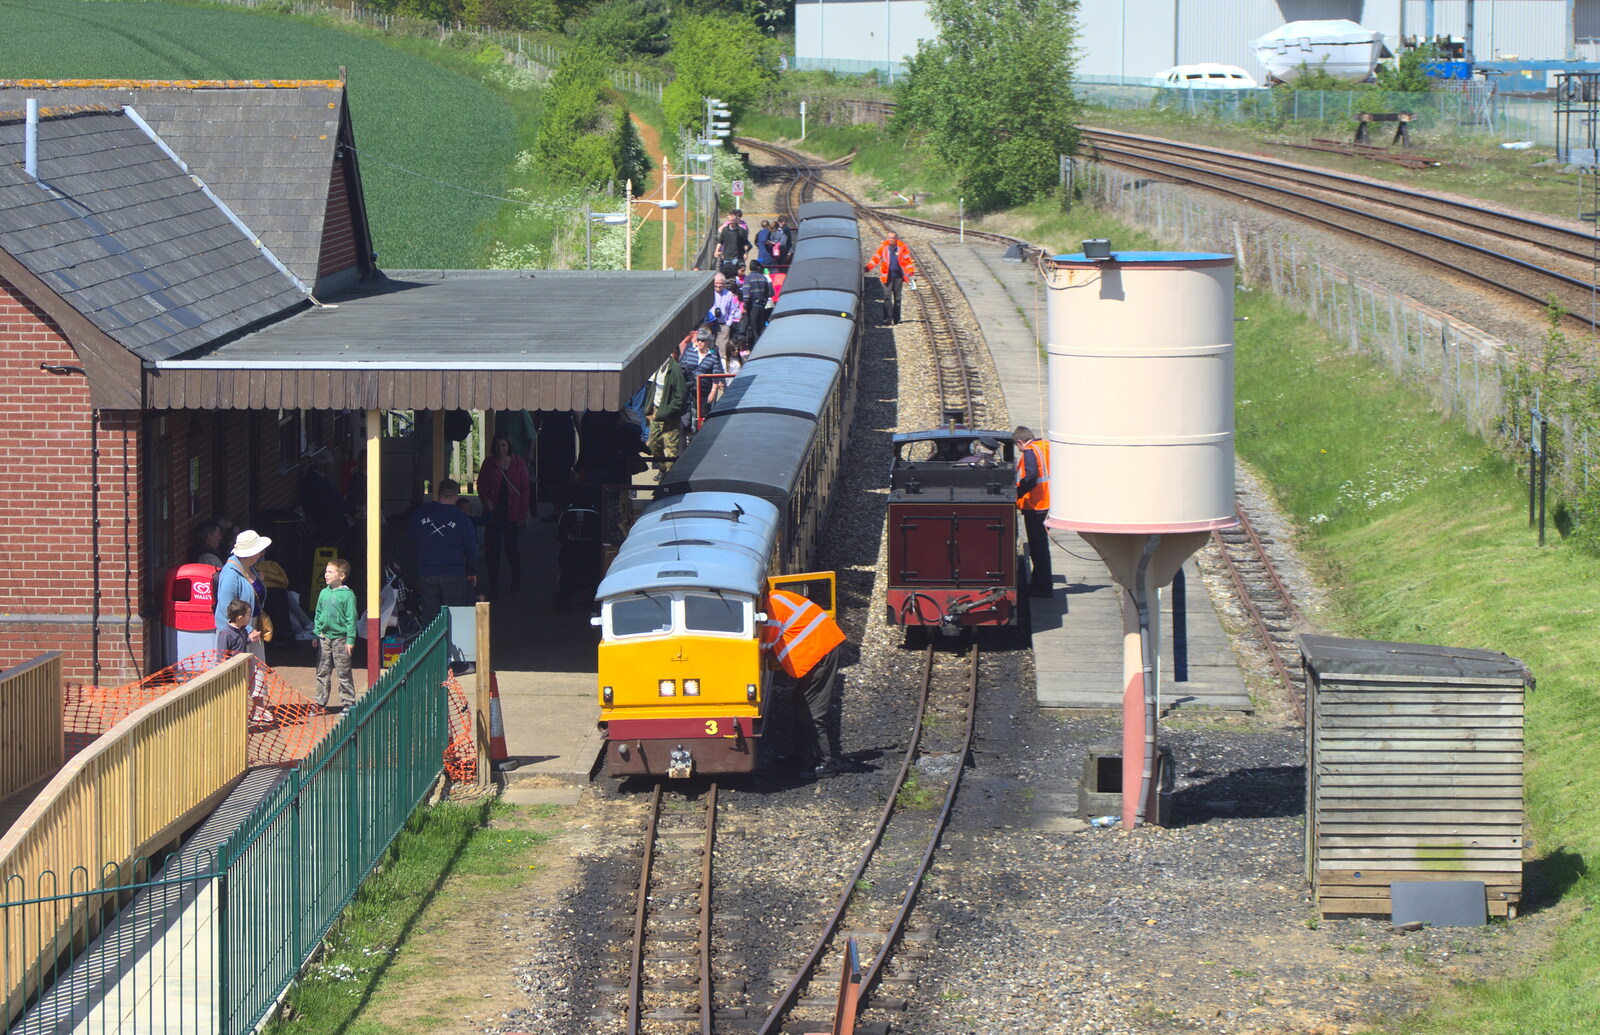 The diesel engine comes in from The Bure Valley Railway, Aylsham, Norfolk - 26th May 2013